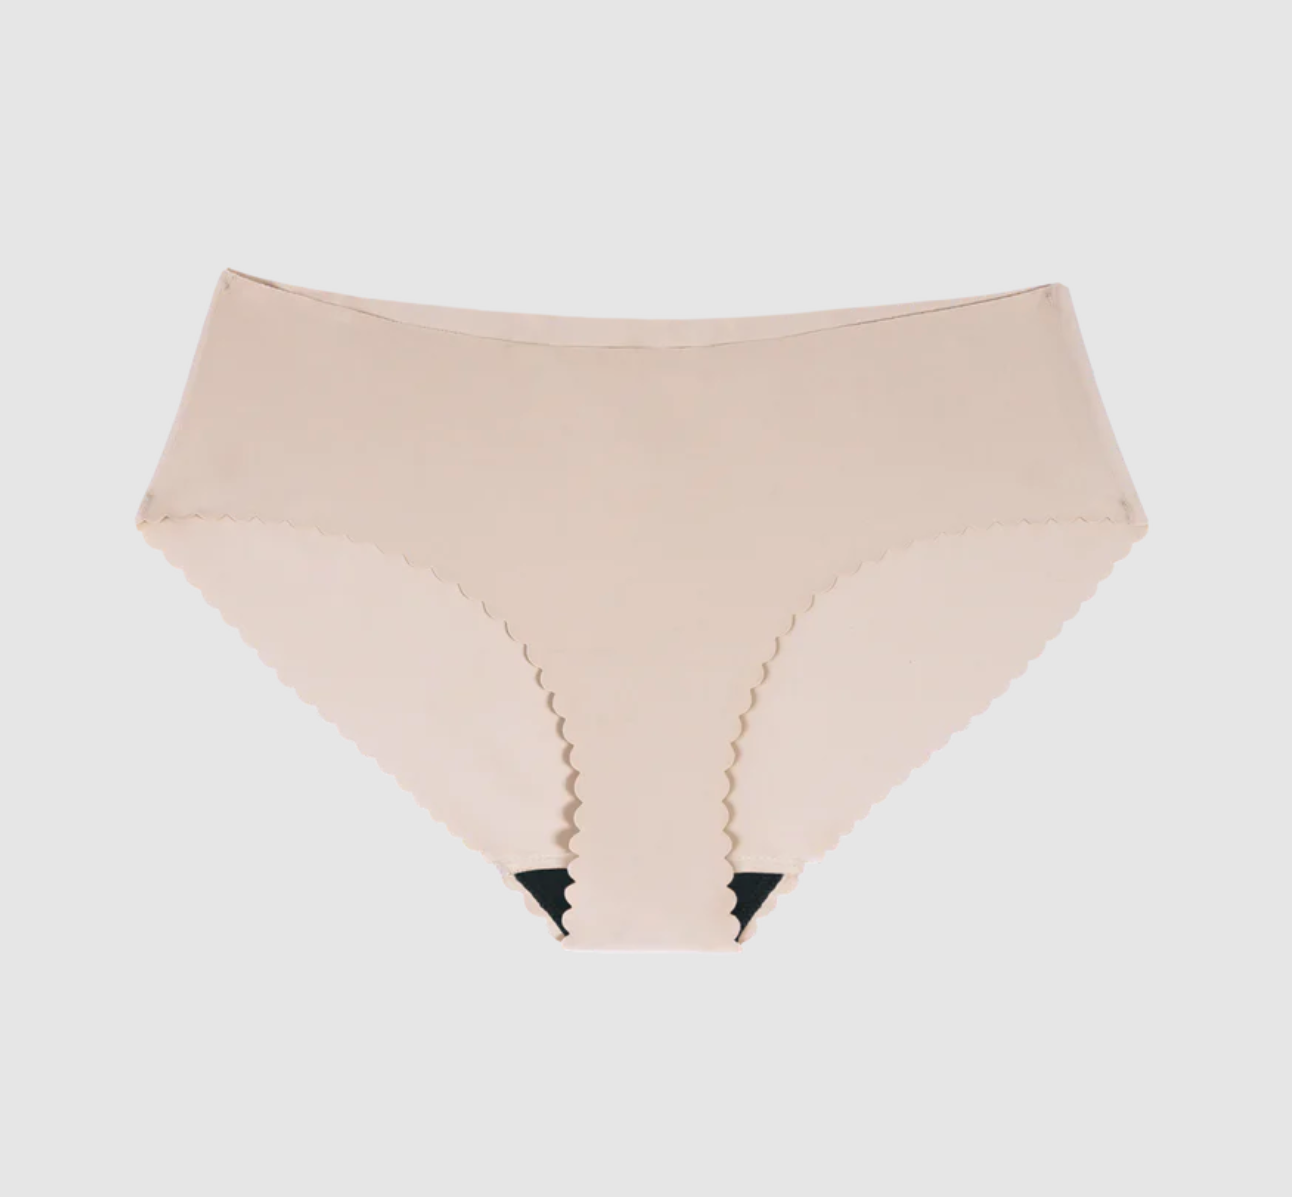 The Everyday Panty